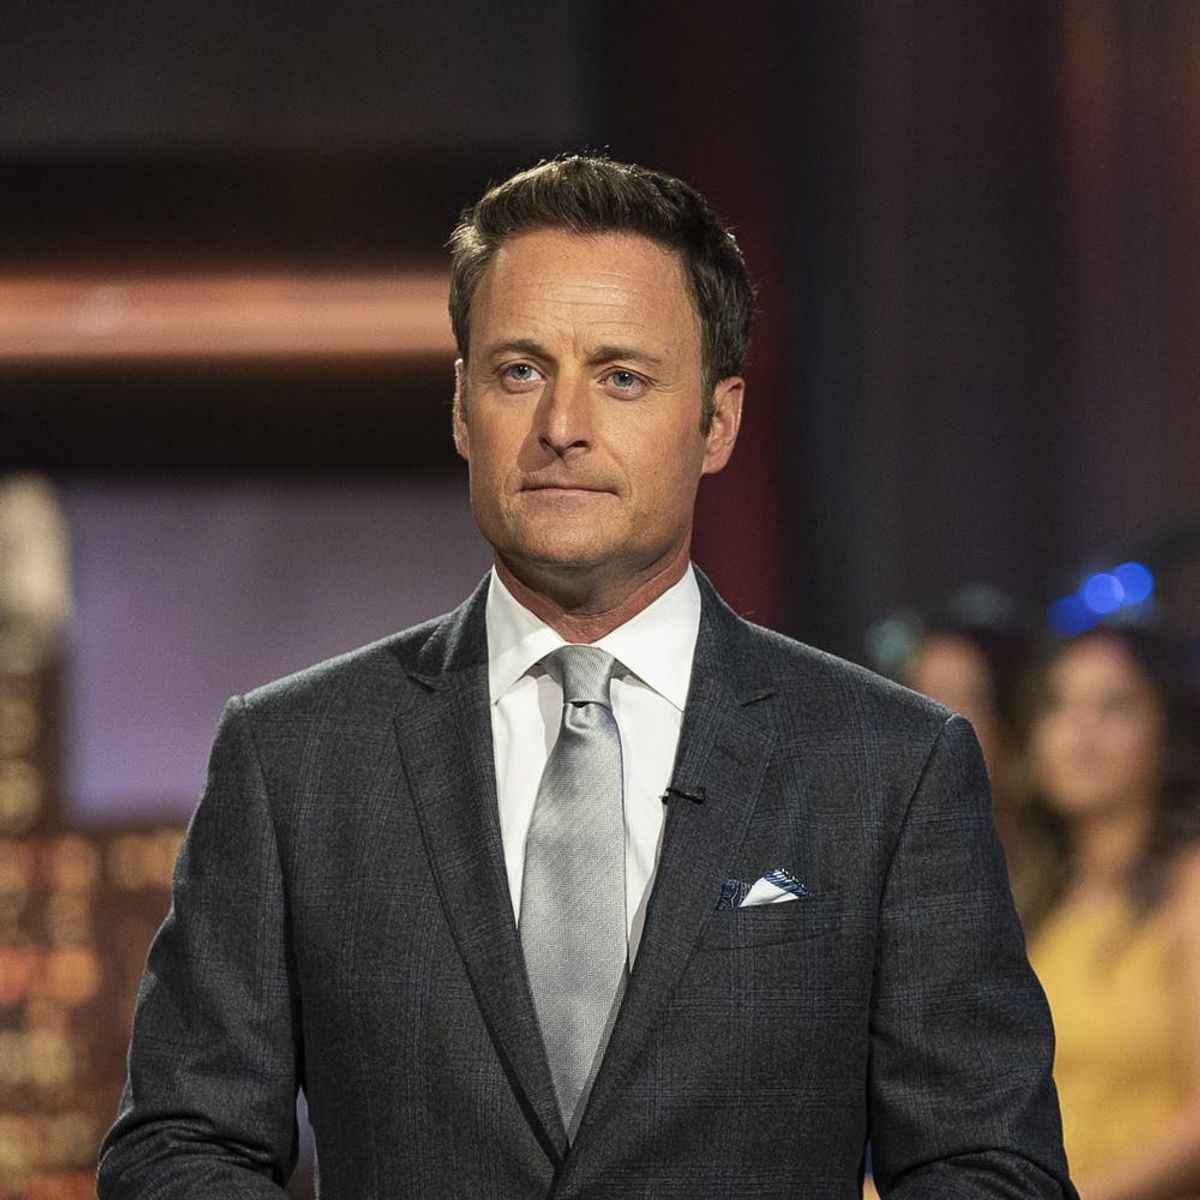 Chris Harrison Weighs the Options for the Next ‘Bachelor’